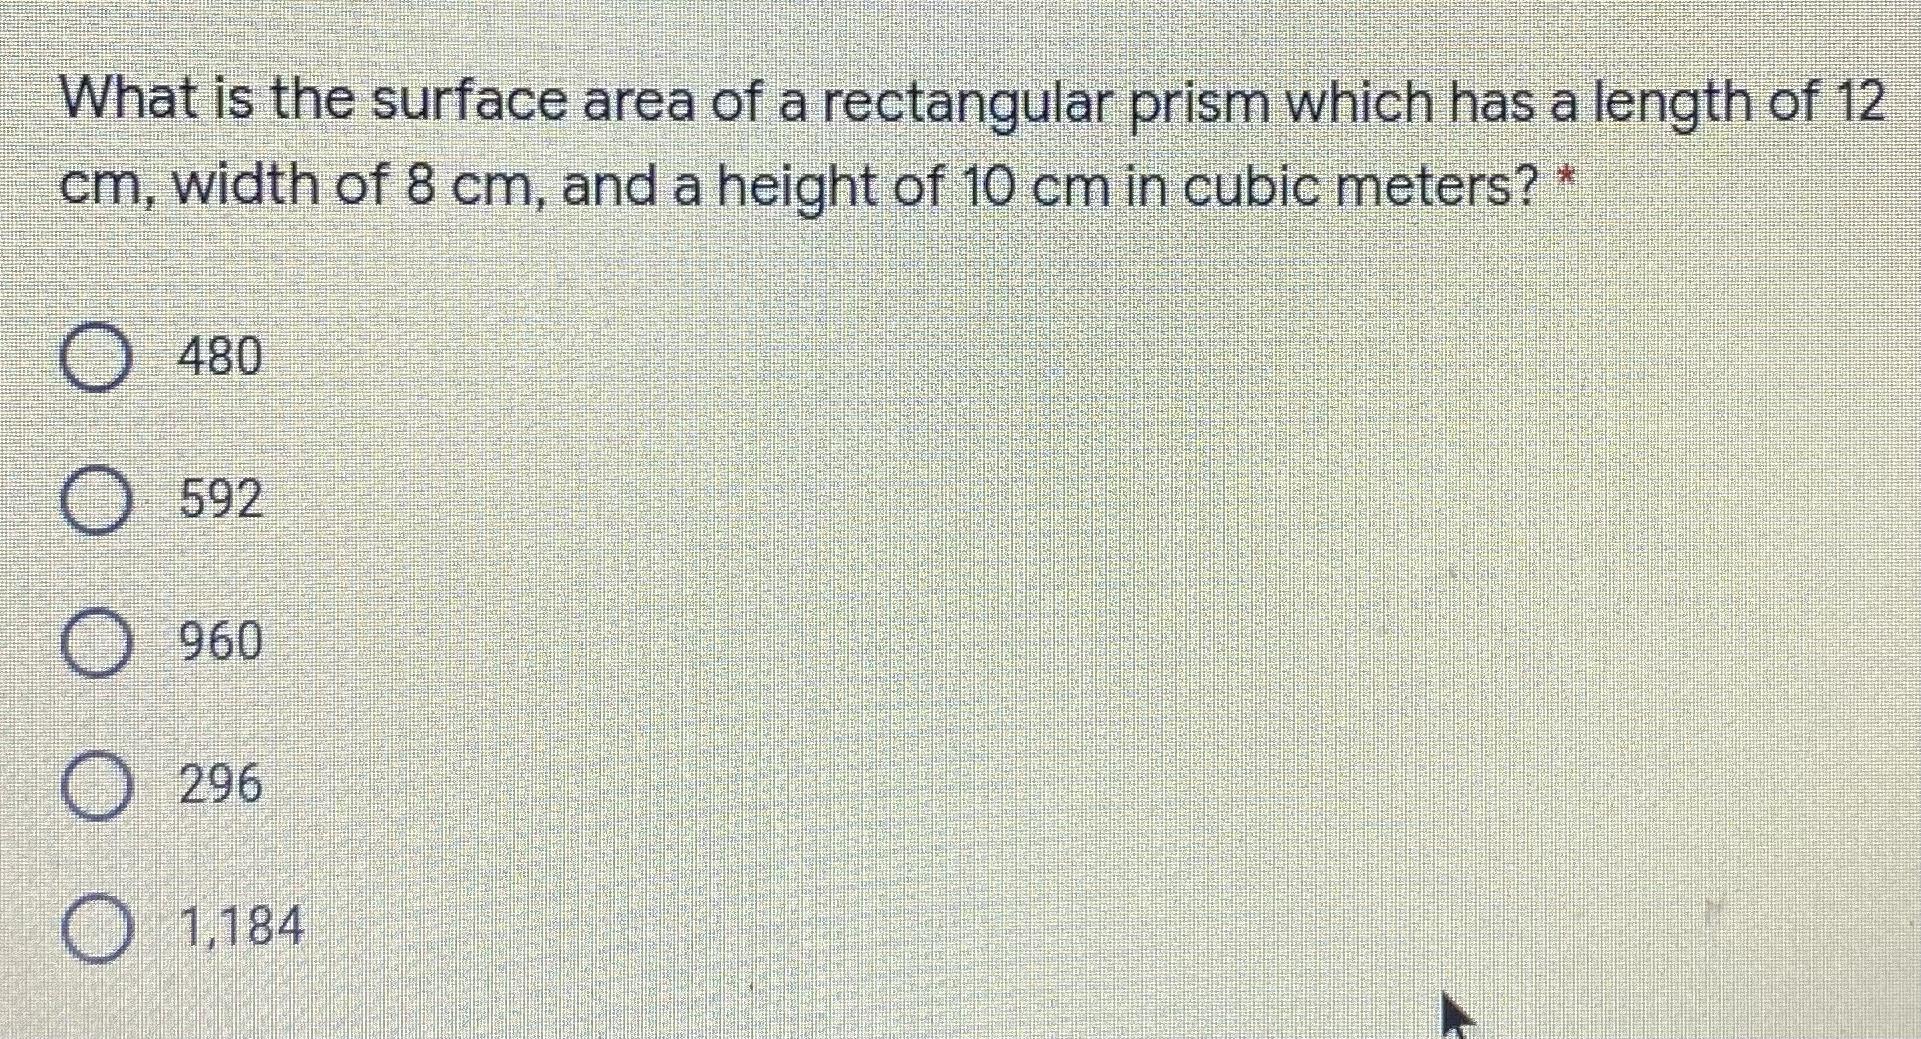 Please Help With This Math ;-;